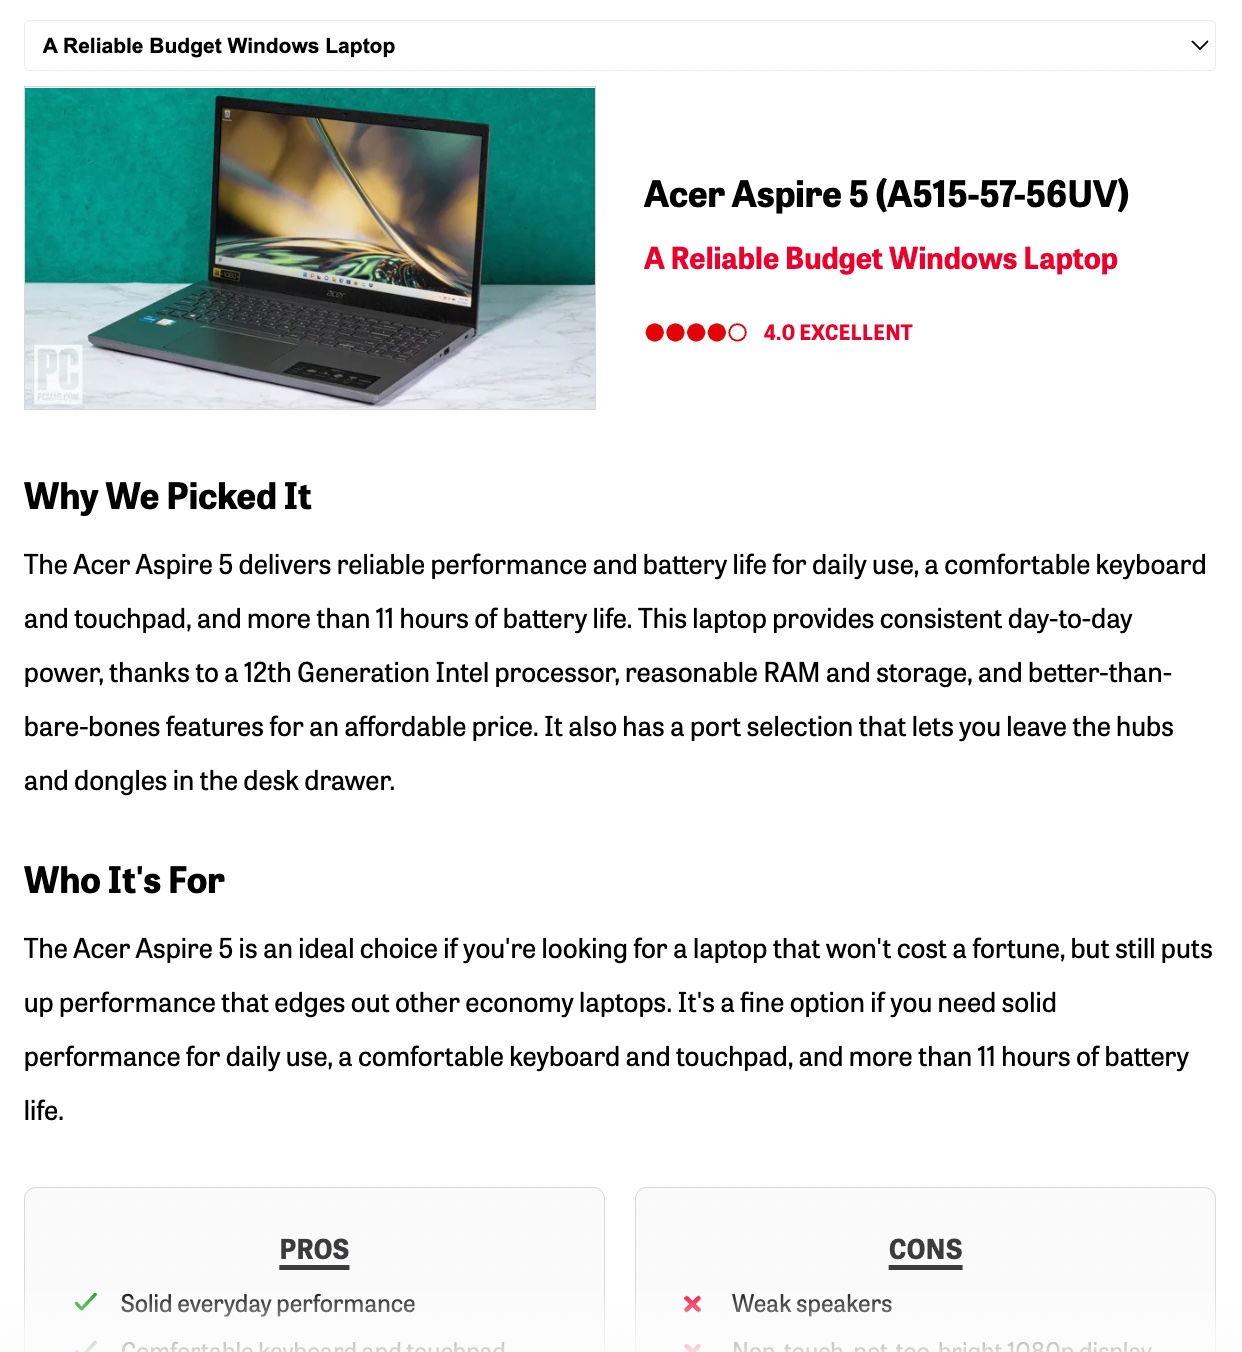 Article's section about "Acer Aspire 5" laptop